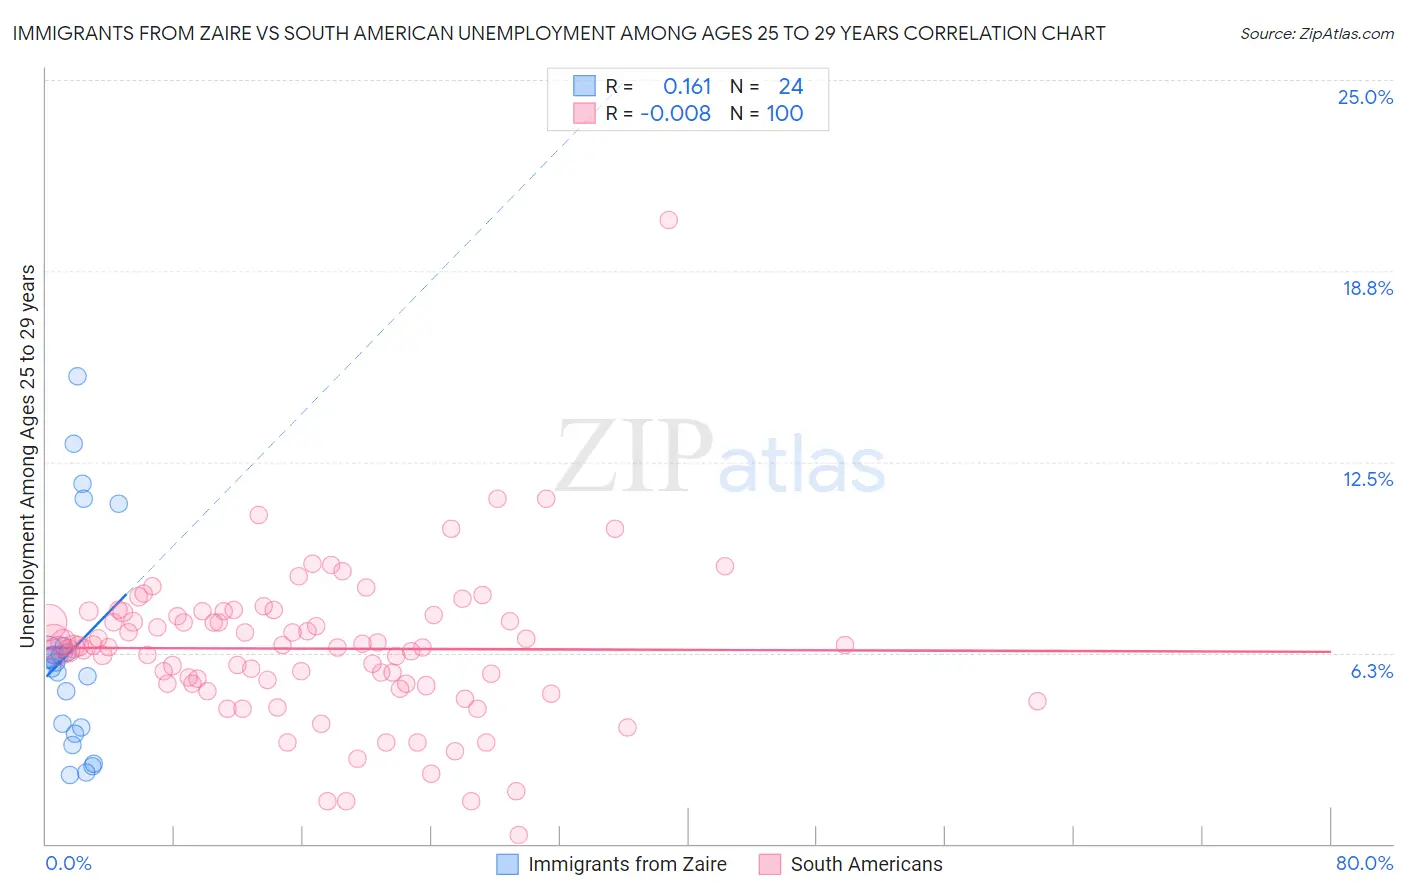 Immigrants from Zaire vs South American Unemployment Among Ages 25 to 29 years